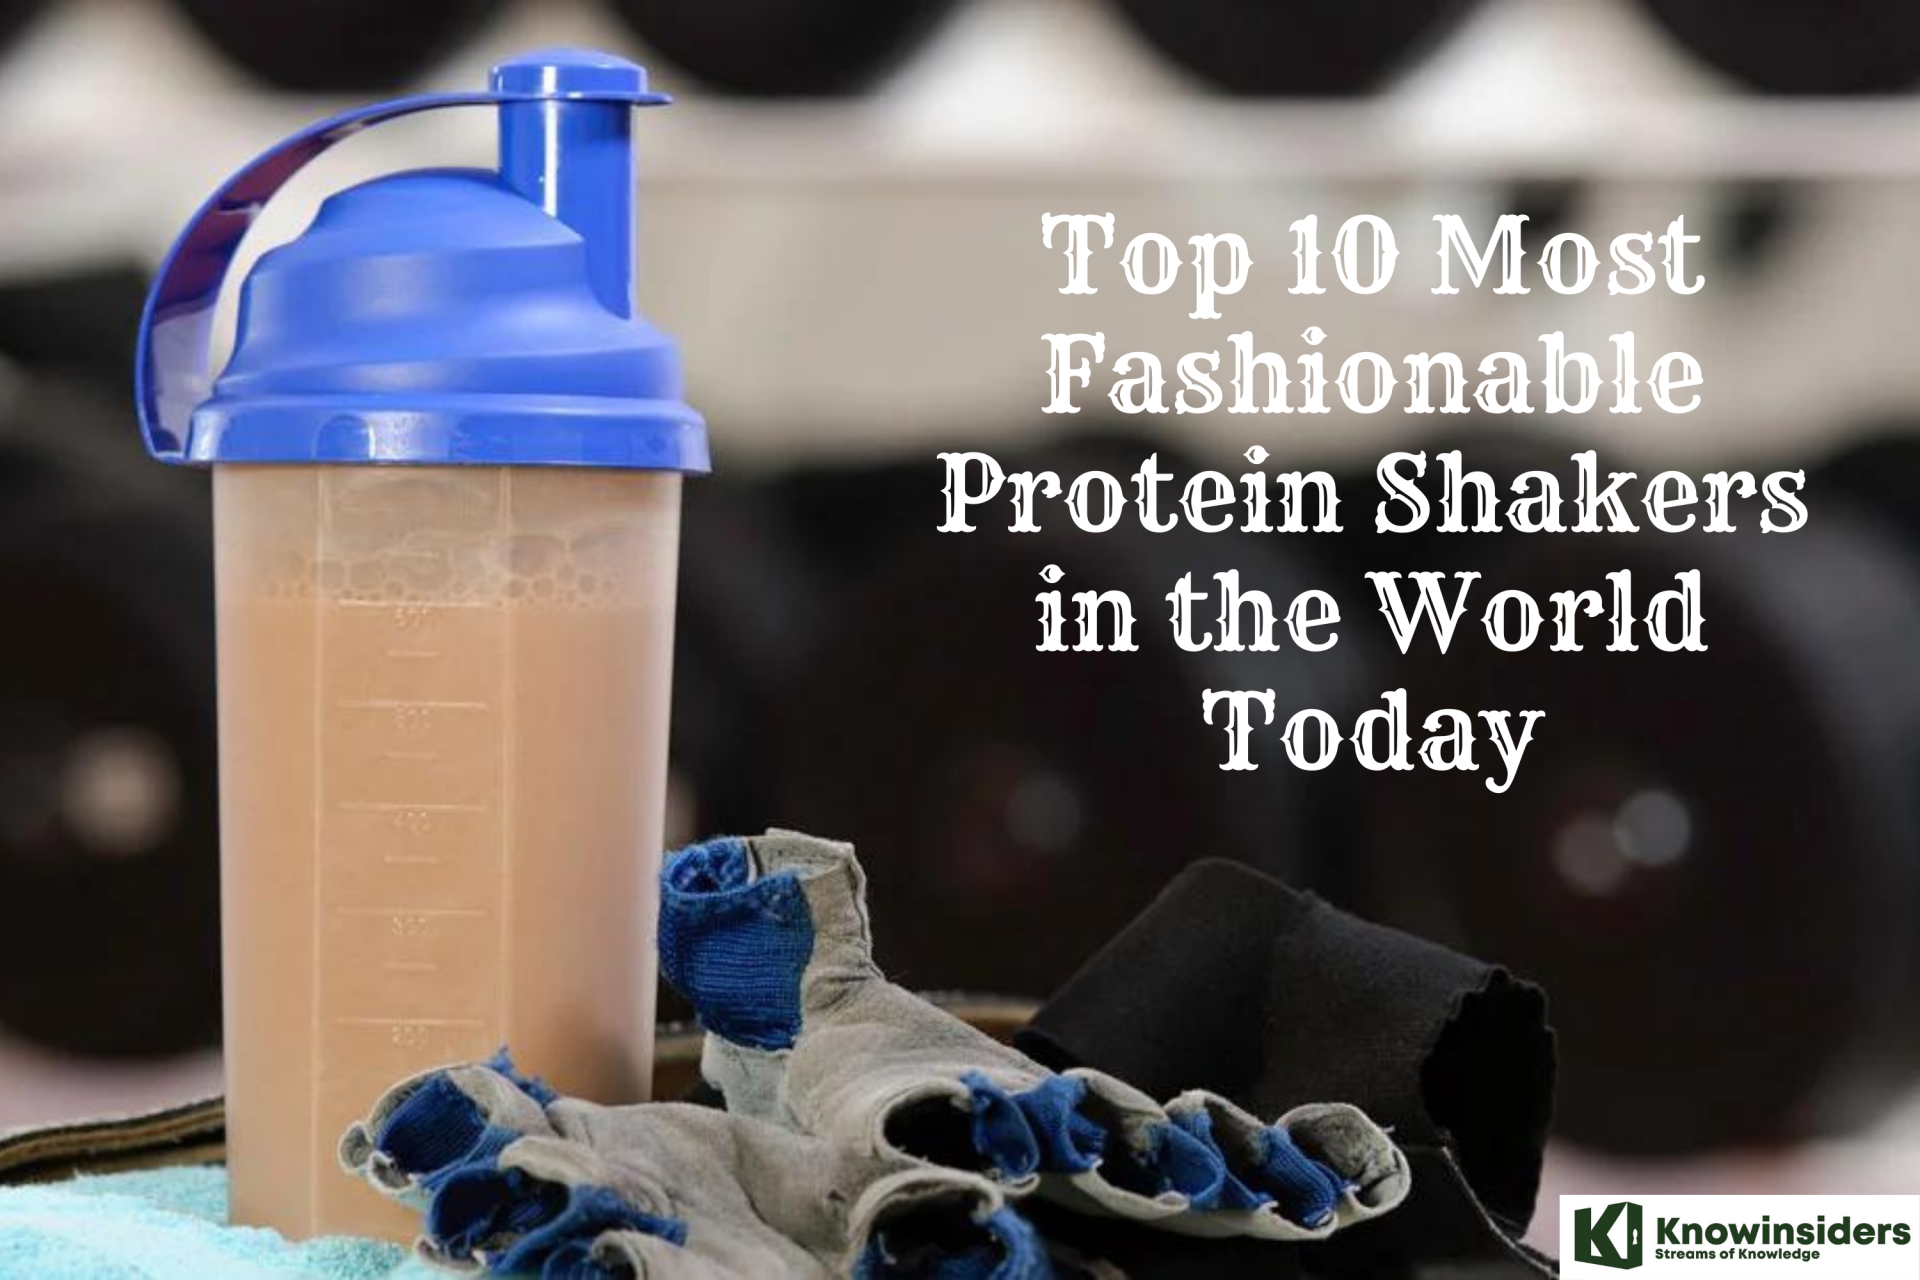 Top 10 Most Fashionable Protein Shakers in the World Today